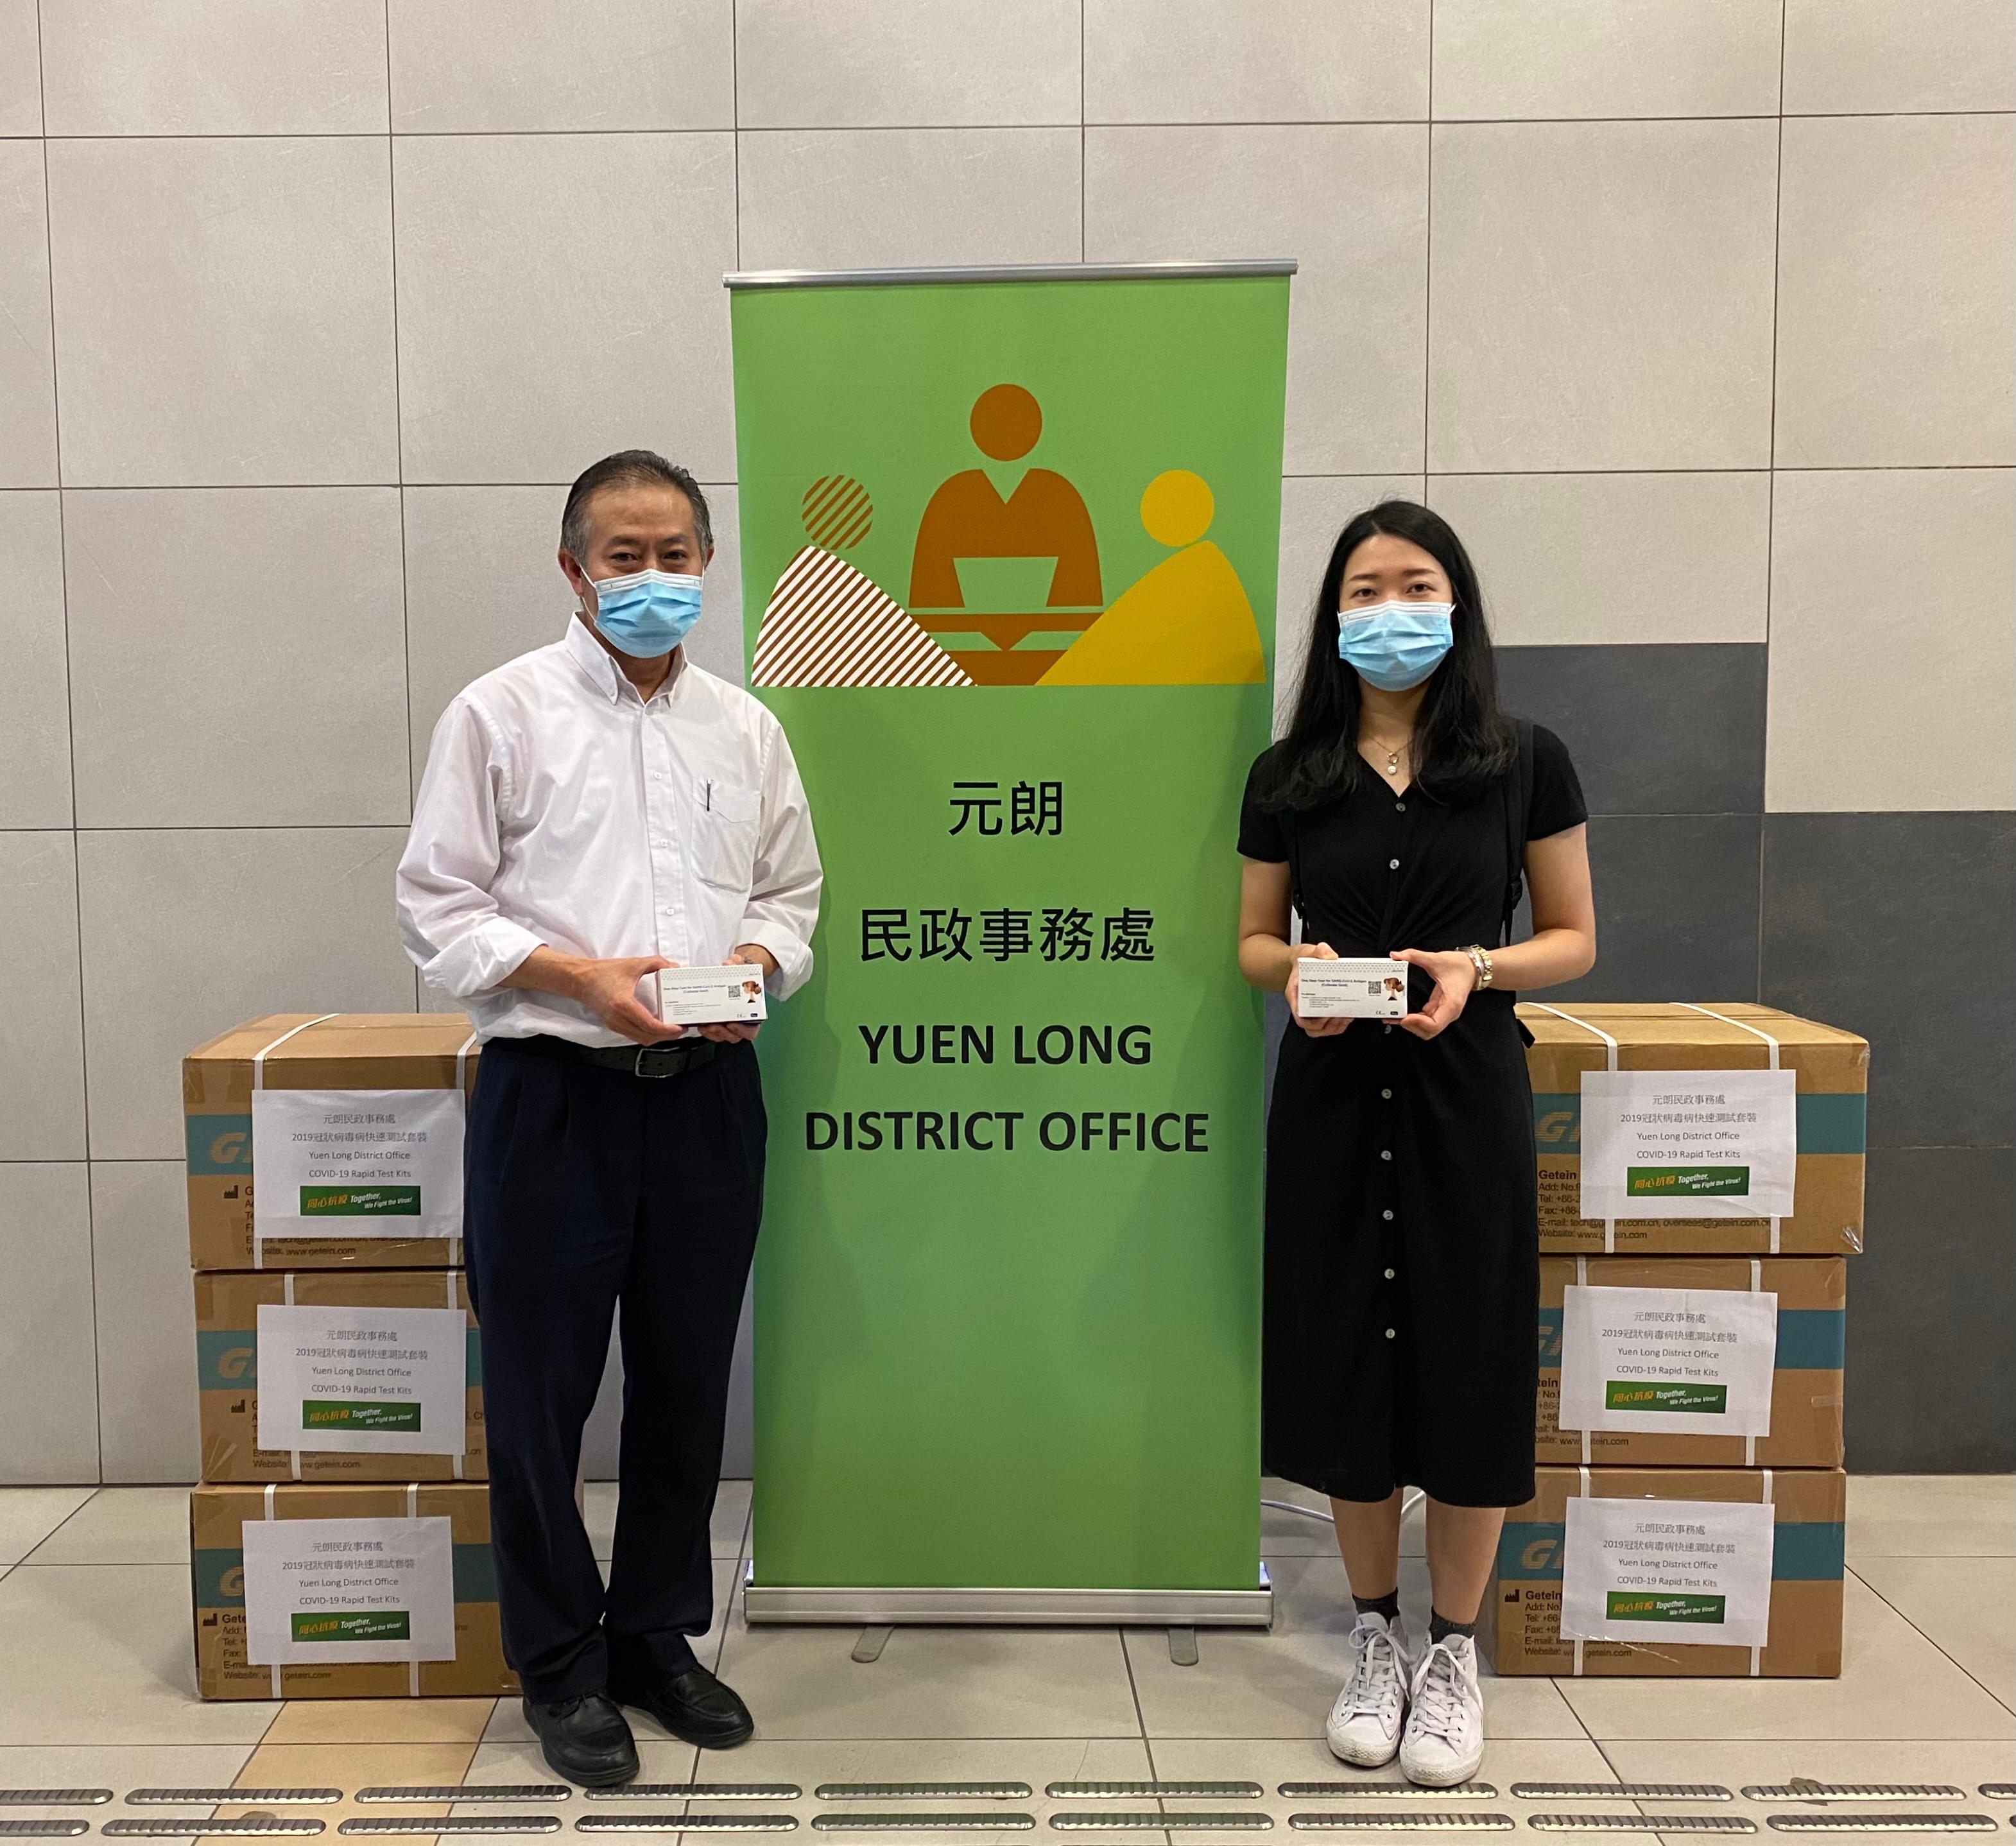 The Yuen Long District Office today (July 8) distributed rapid test kits to households, cleansing workers and property management staff living and working in Locwood Court of Kingswood Villas for voluntary testing through the property management company.